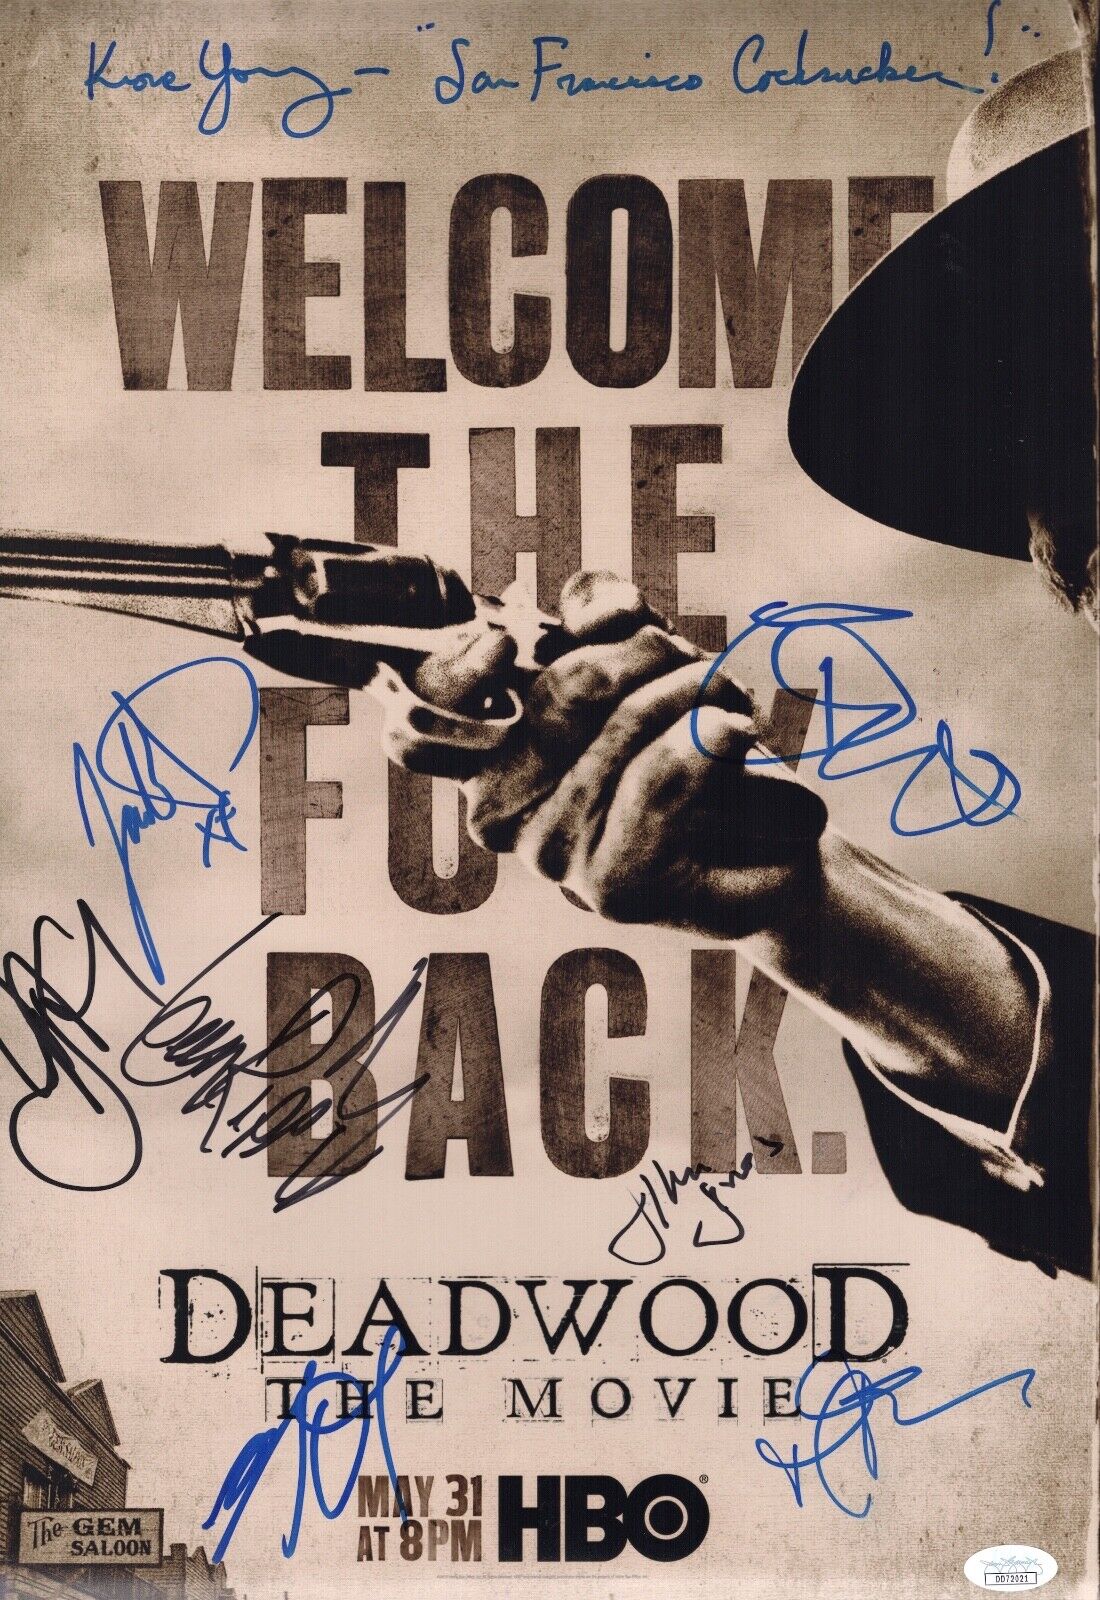 Ian McShane DEADWOOD Cast X8 Signed 12x18 Photo Poster painting IN PERSON Autograph JSA COA